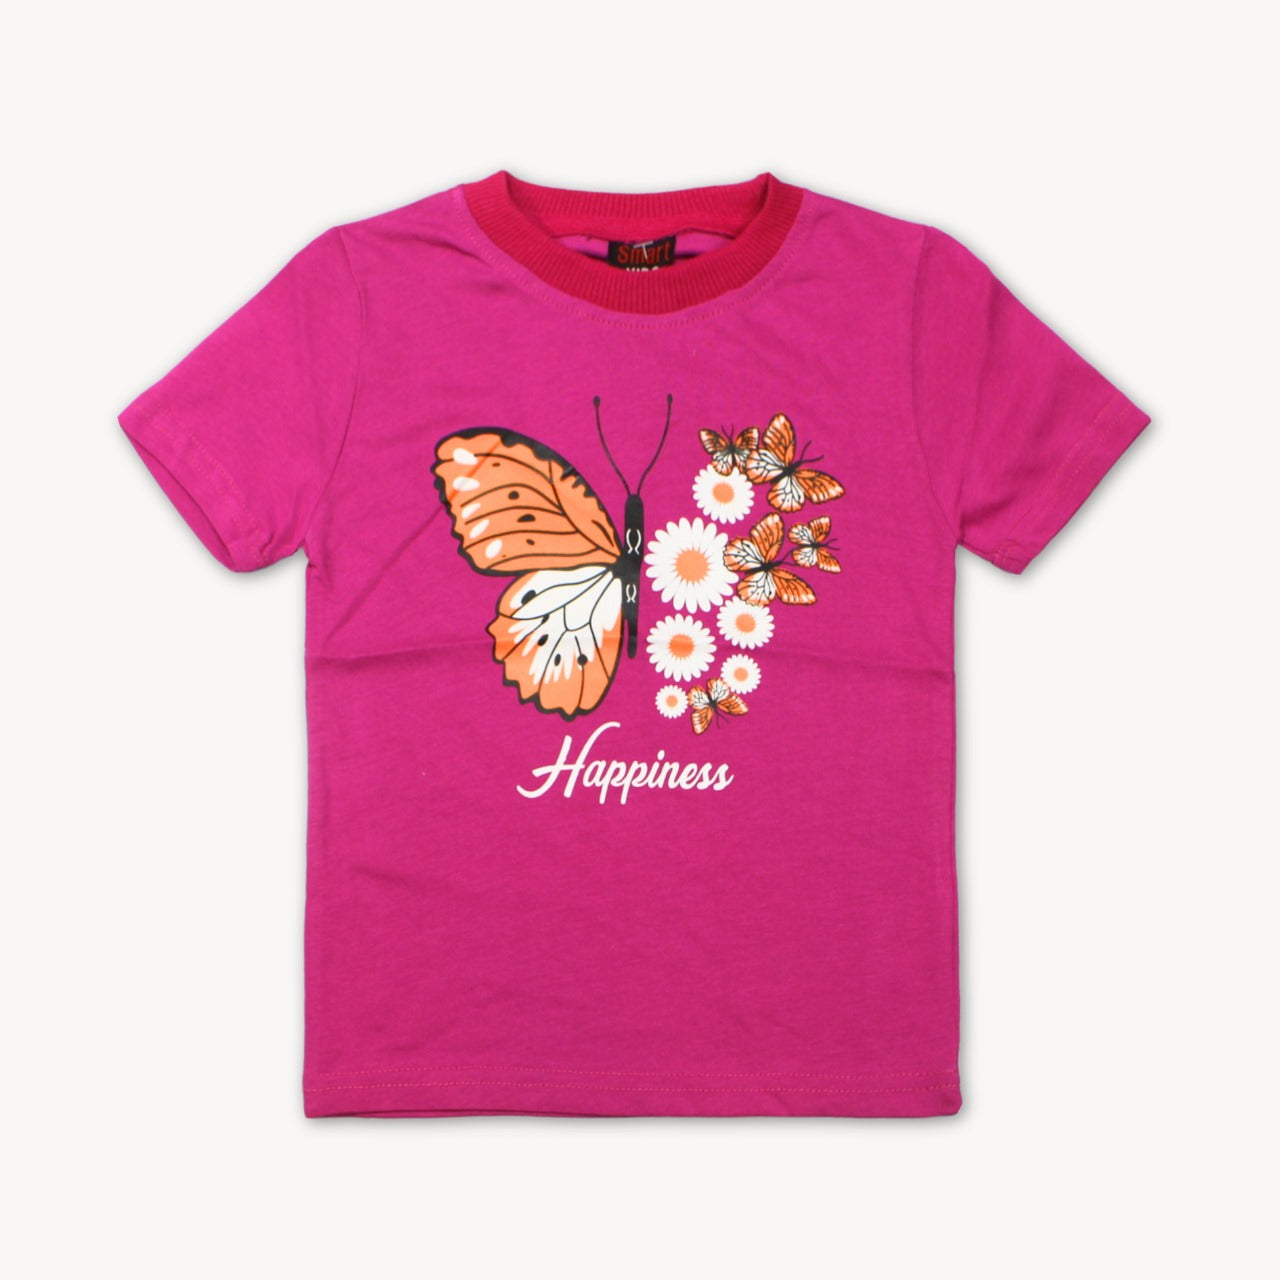 Pink Happiness Butterfly Printed Cotton T-Shirt